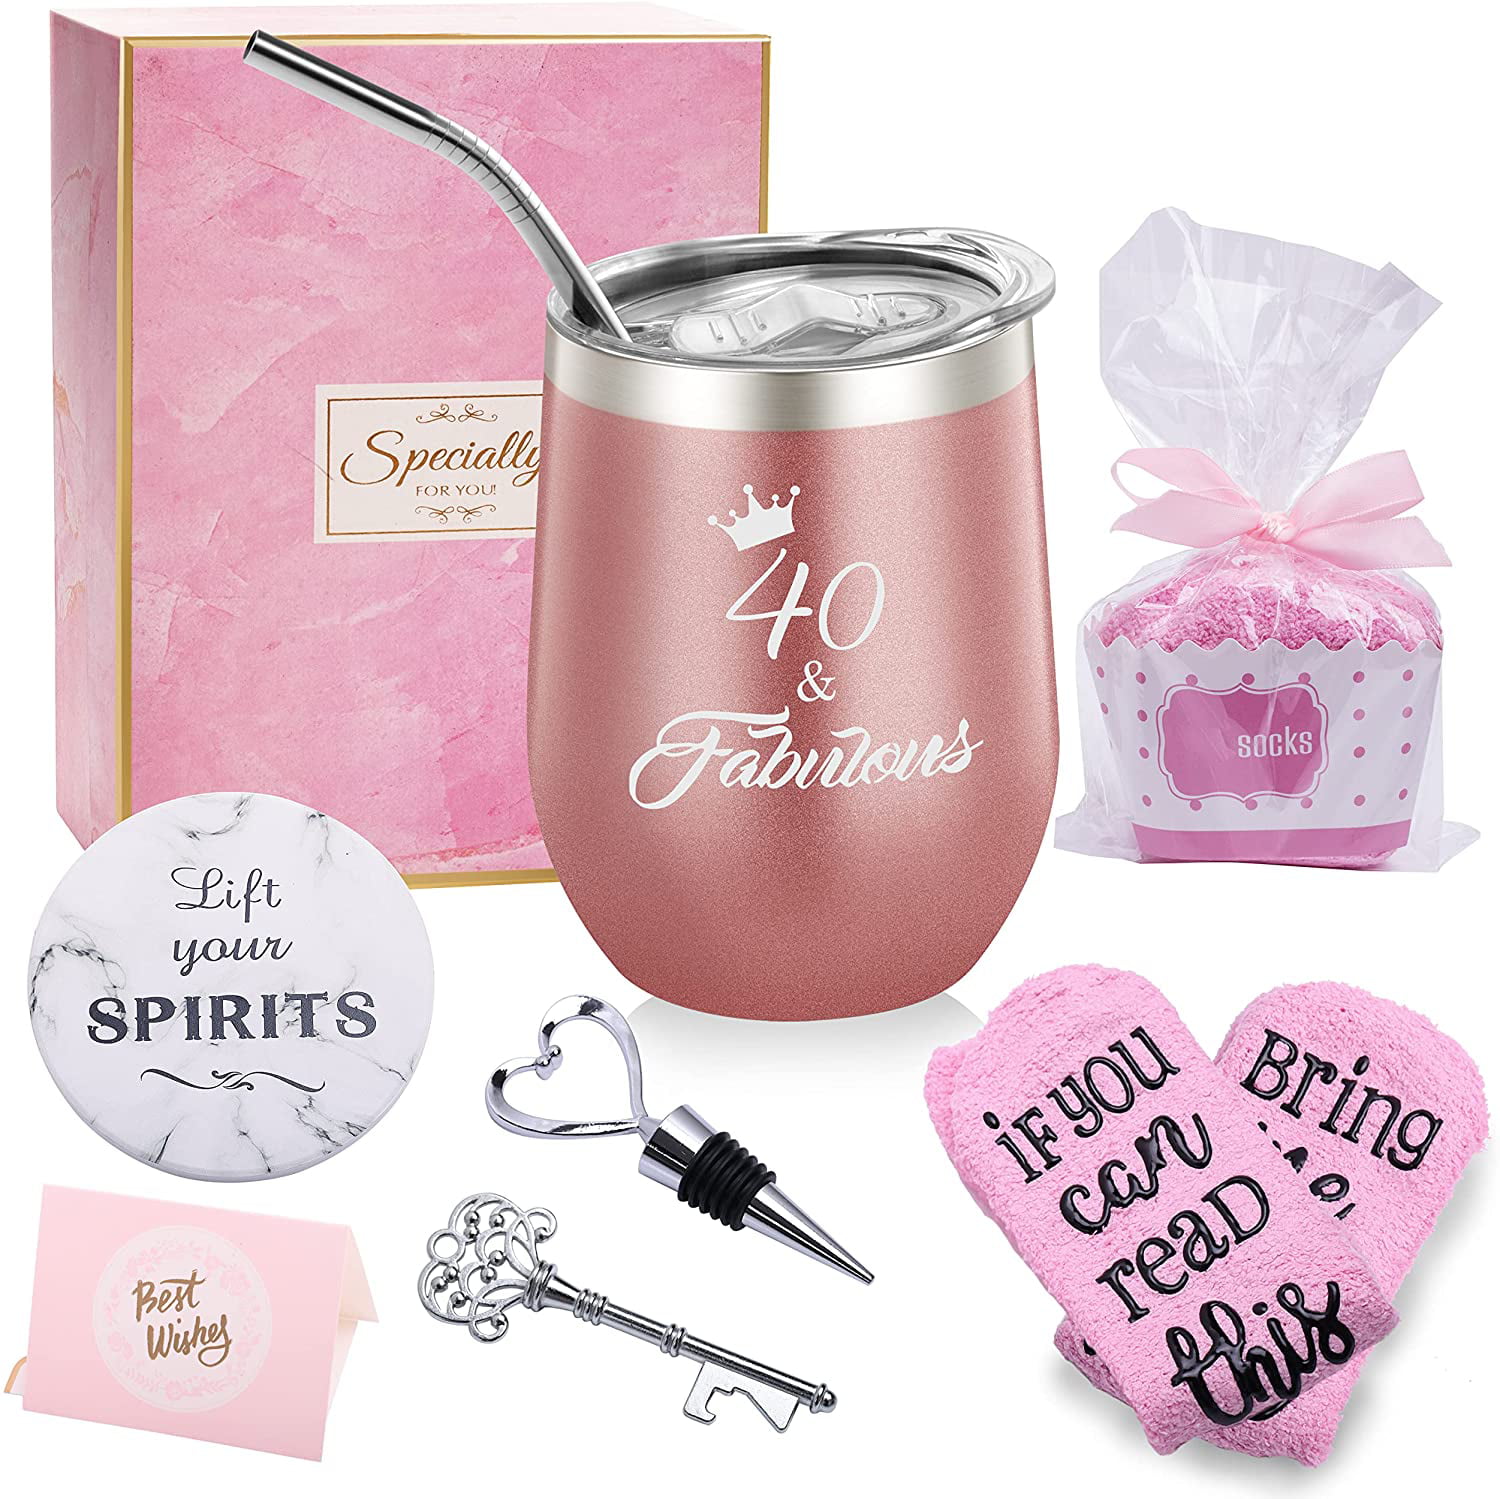 Grandma Gifts for Women Not a Day Over Fabulous Wine Tumbler Friend BFF Cute Birthday Gifts for Women Funny Birthday Wine Gifts Ideas for Her Sister Coworker Daughter Mom Aunt Wife 